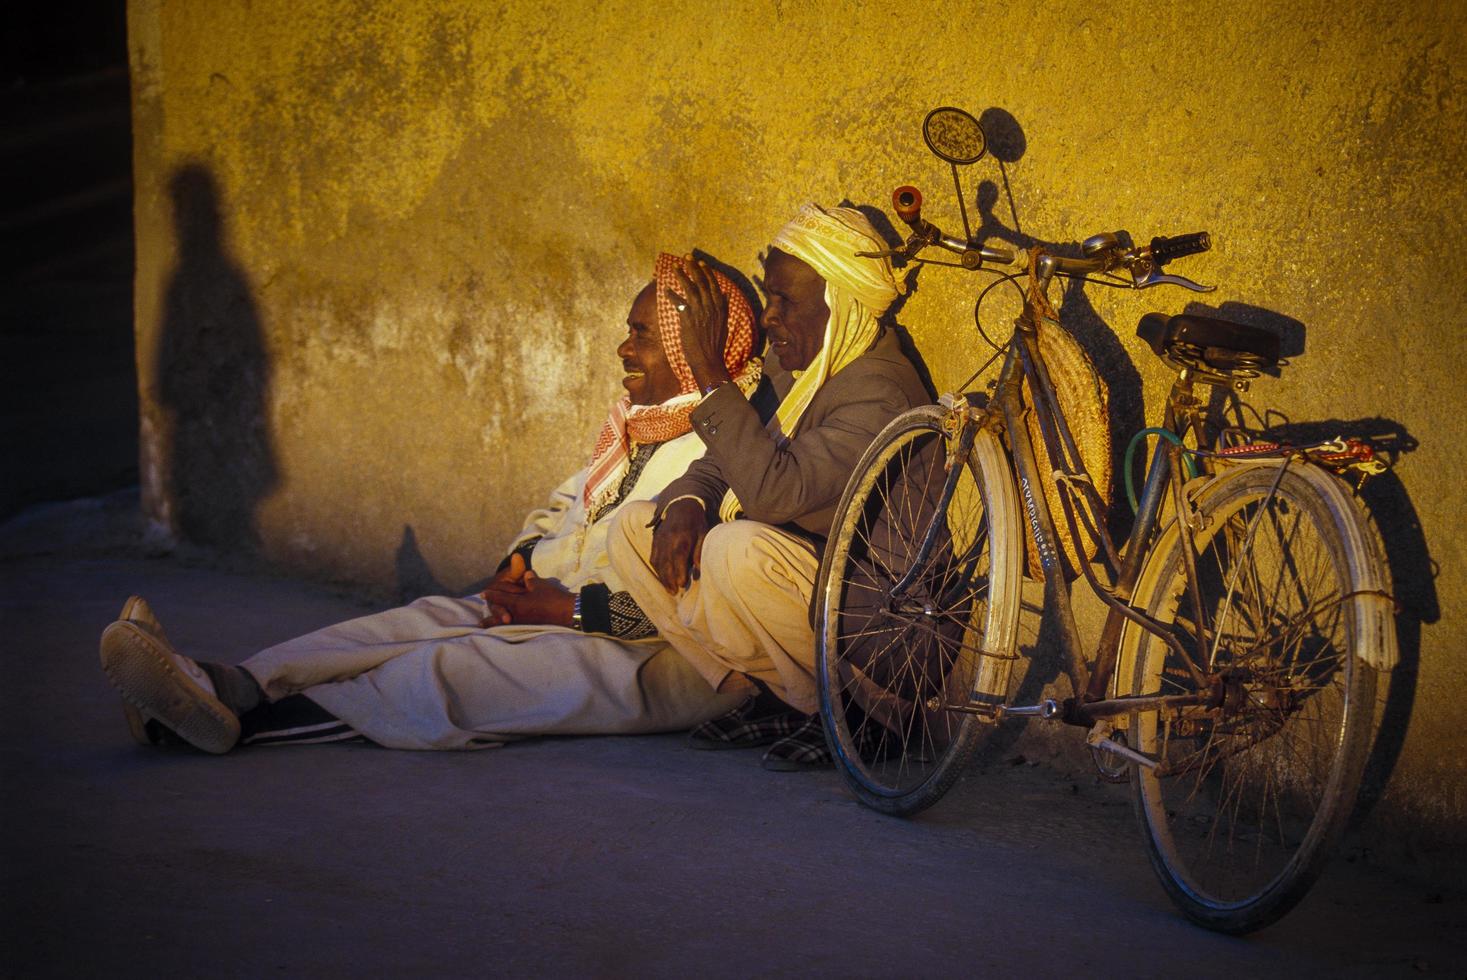 Tamanrasset, Algeria 2010- Unknown person sitting with his bicycle photo